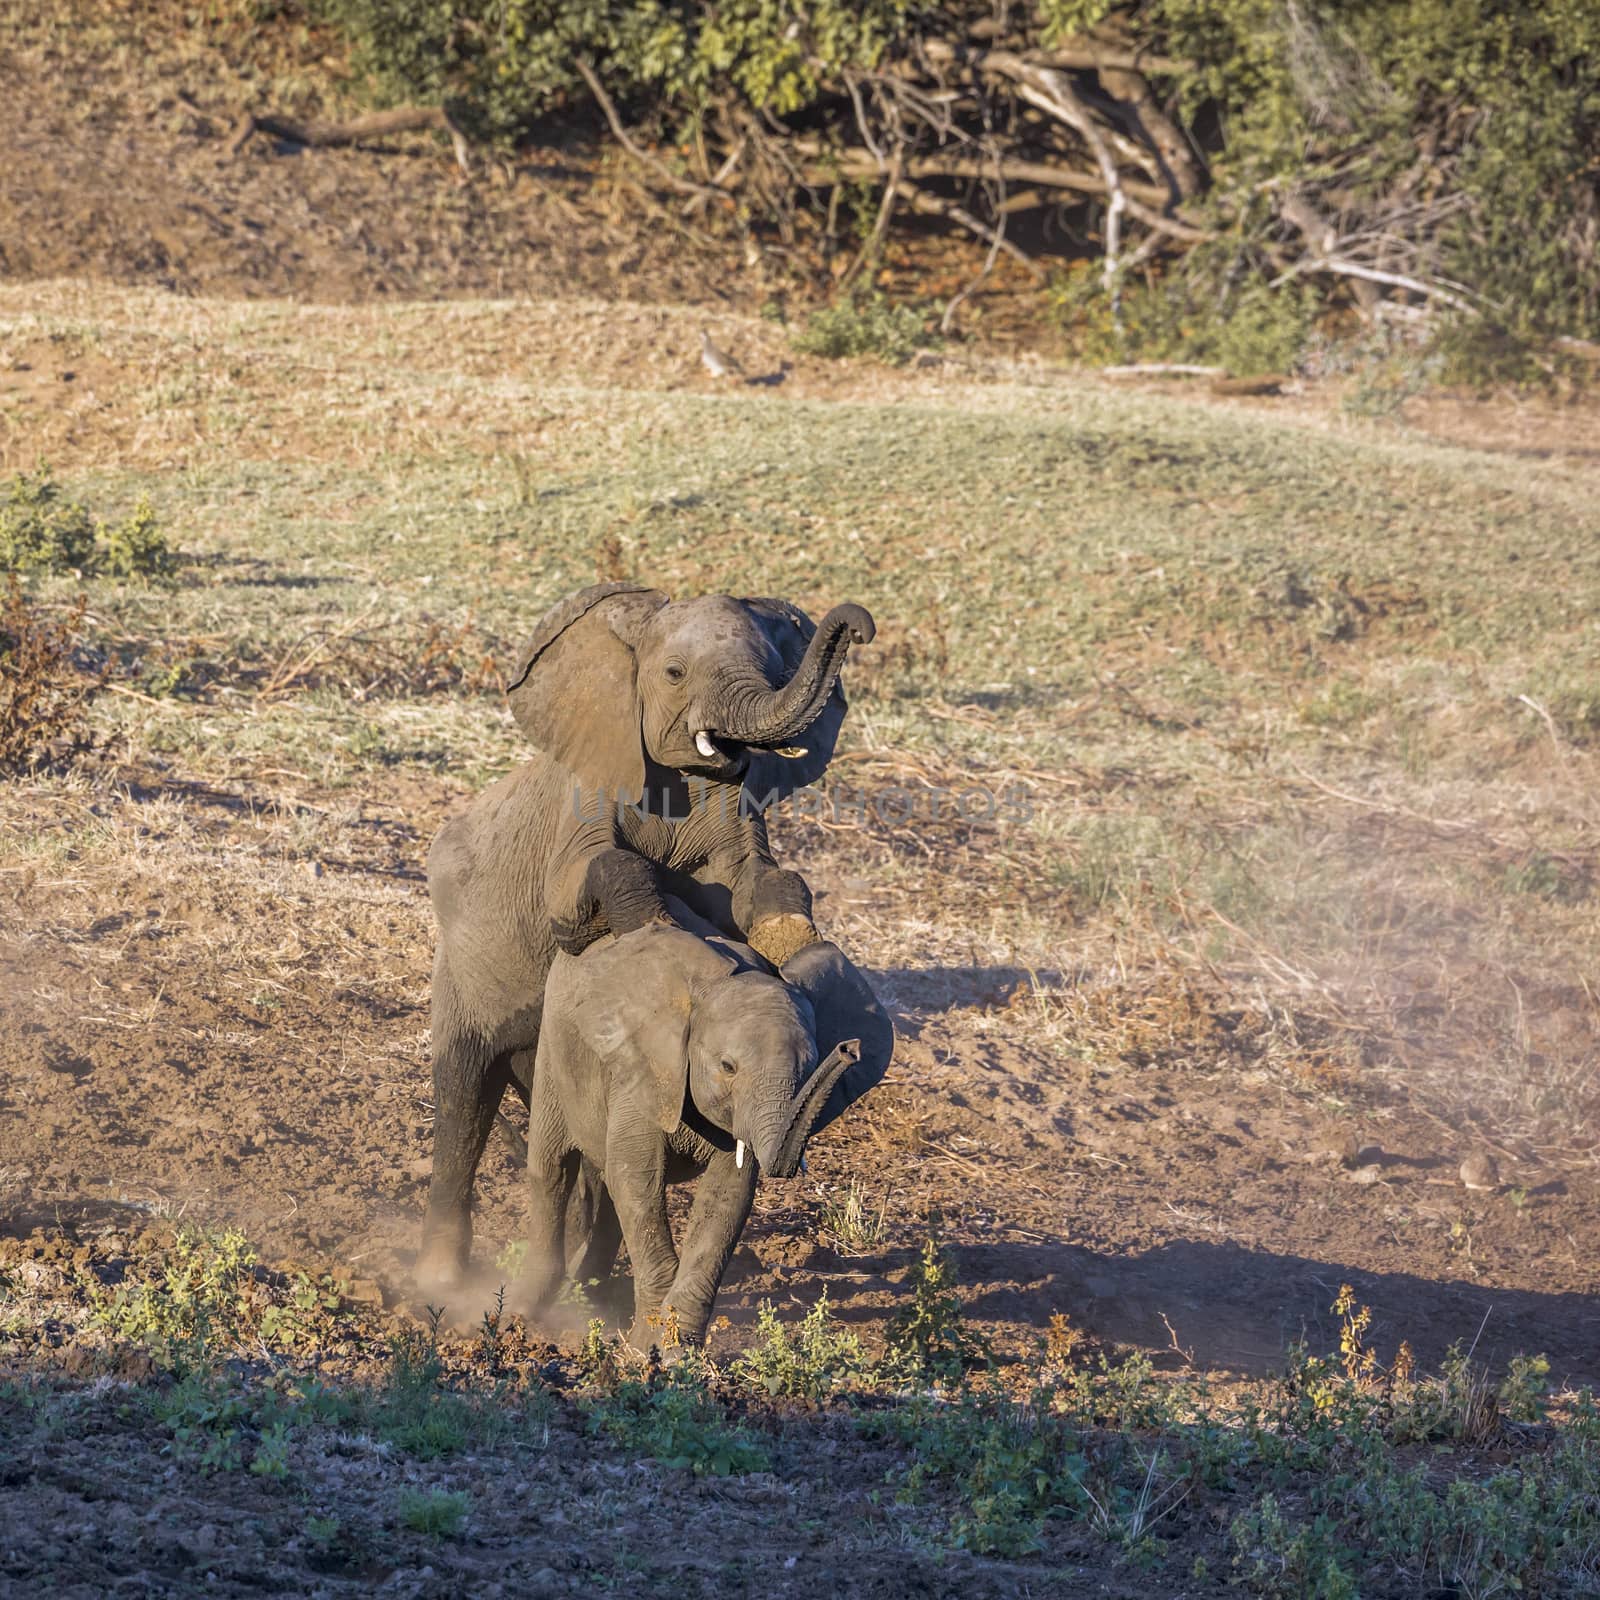 Two young African bush elephants playing mating in Kruger National park, South Africa ; Specie Loxodonta africana family of Elephantidae